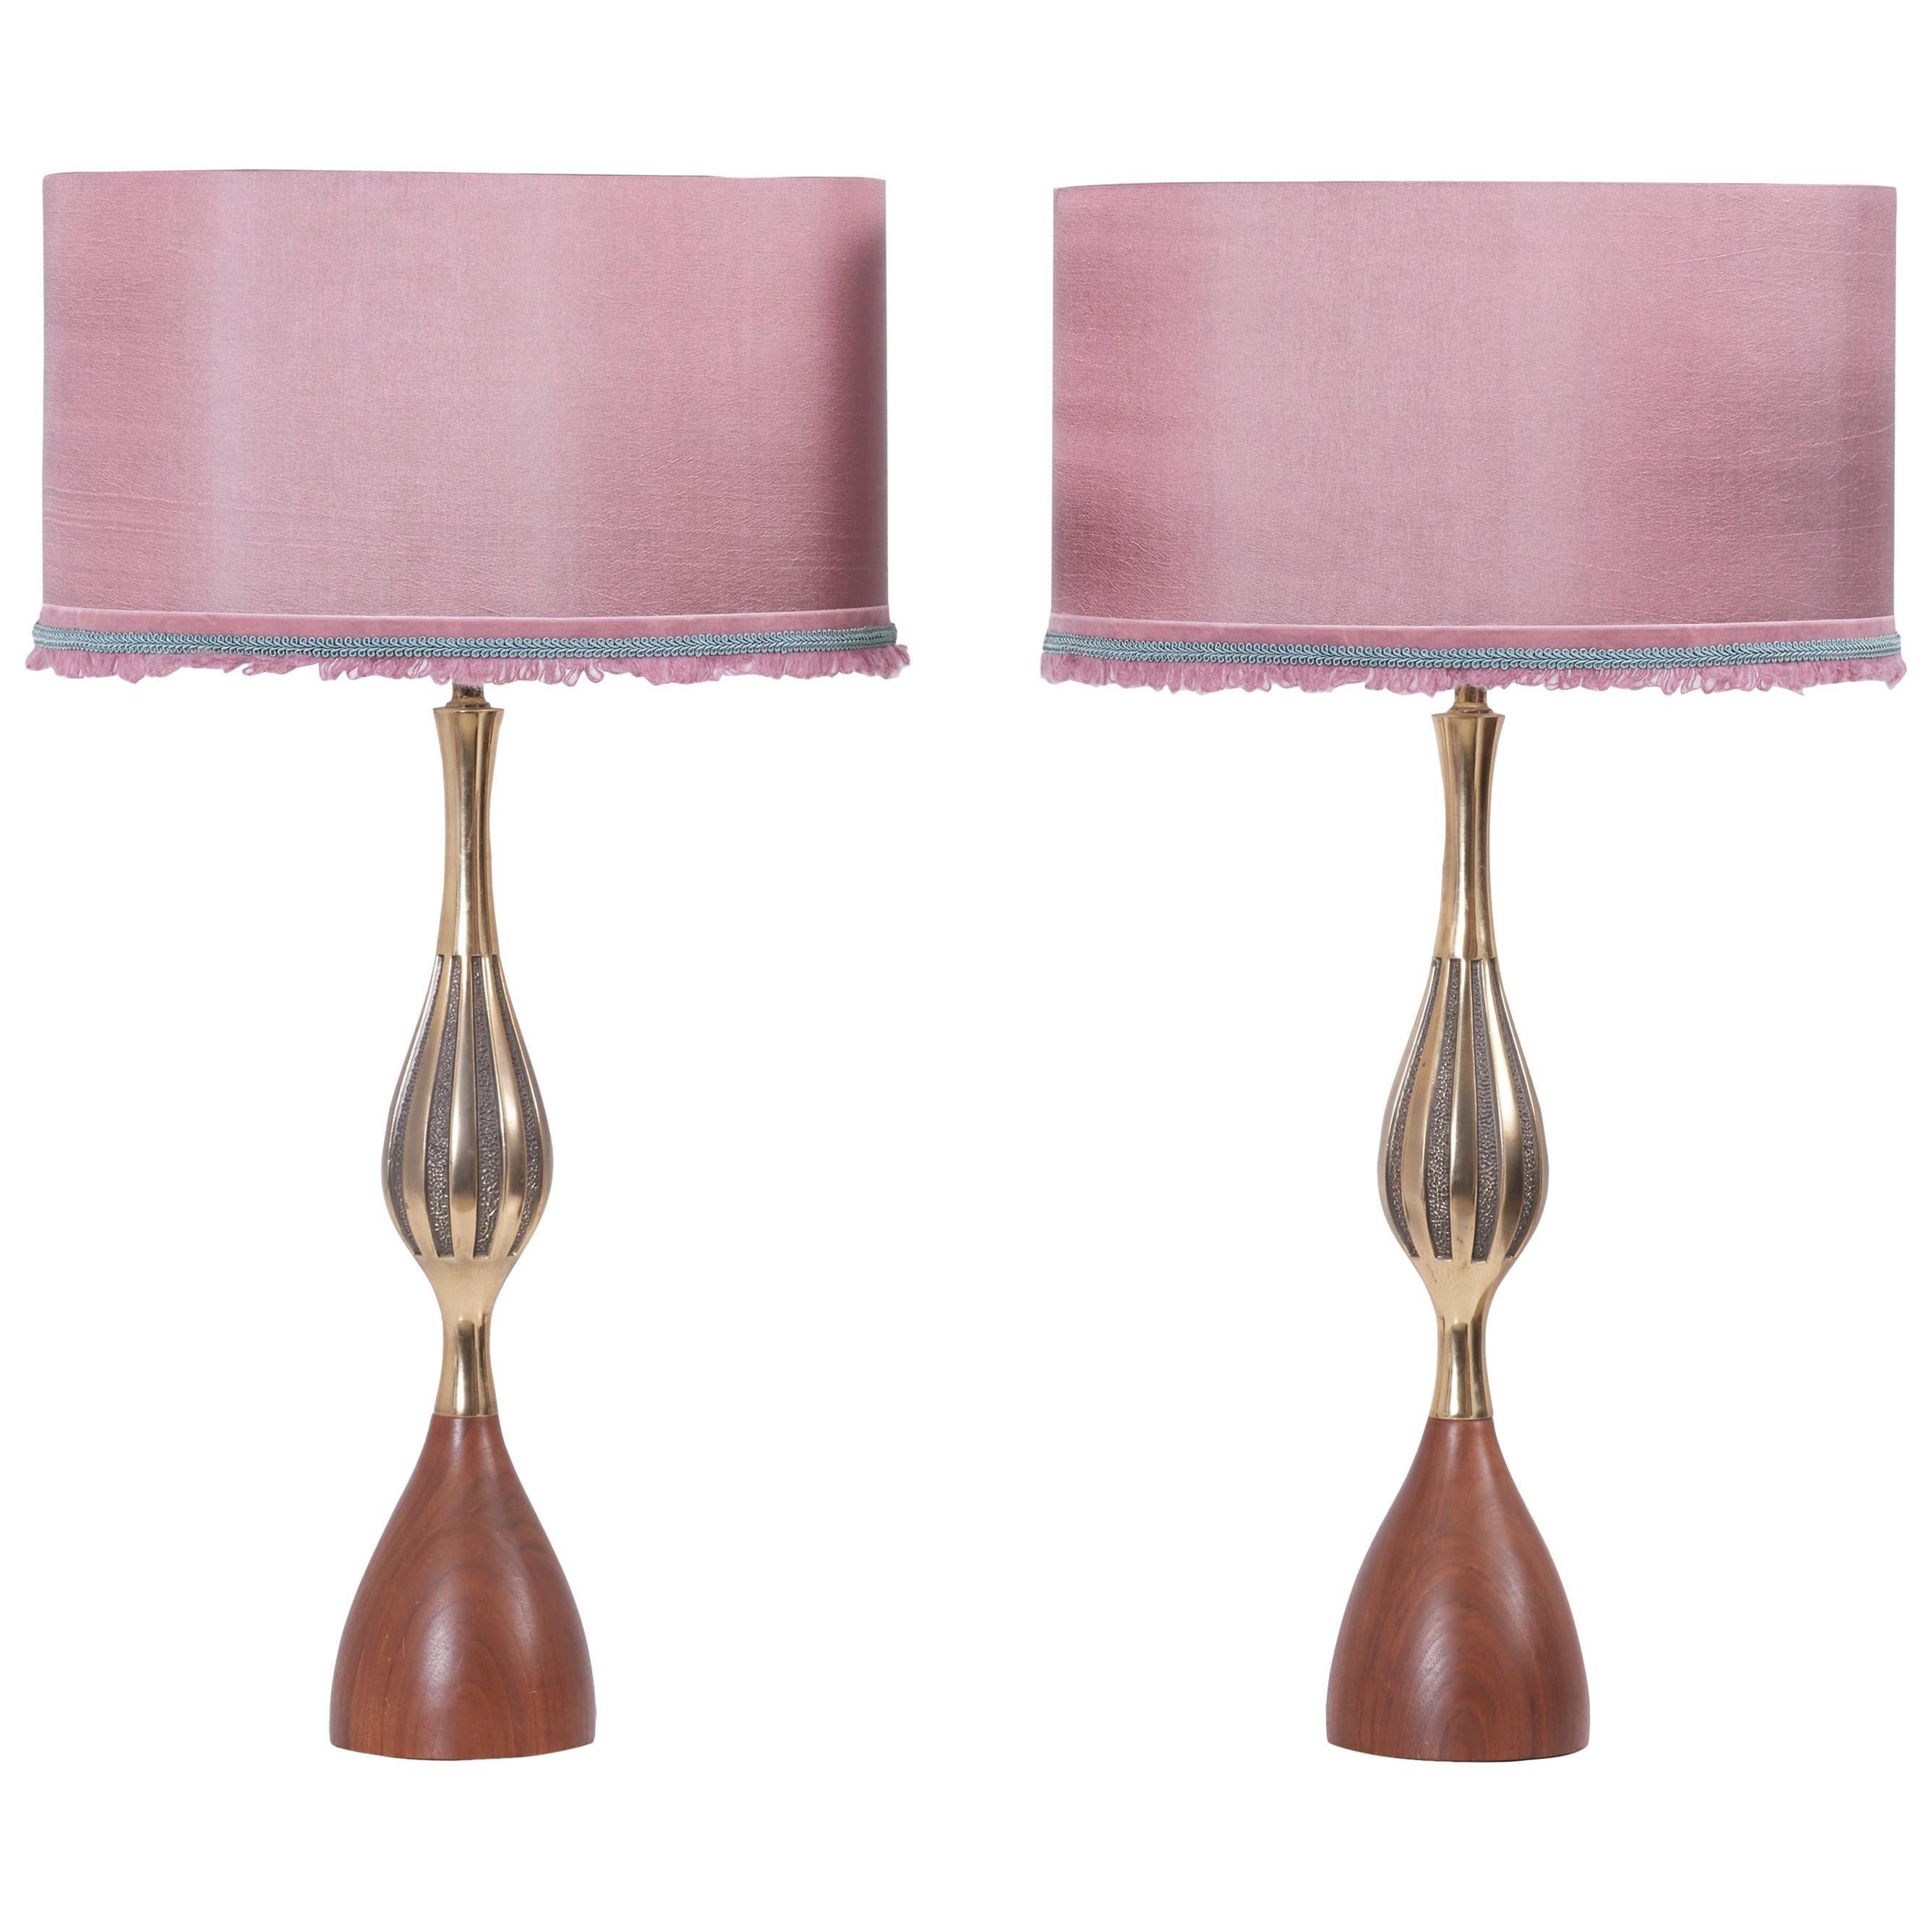 Pair of Table Lamps by Tony Paul for Westwood Lightning, USA, 1960s